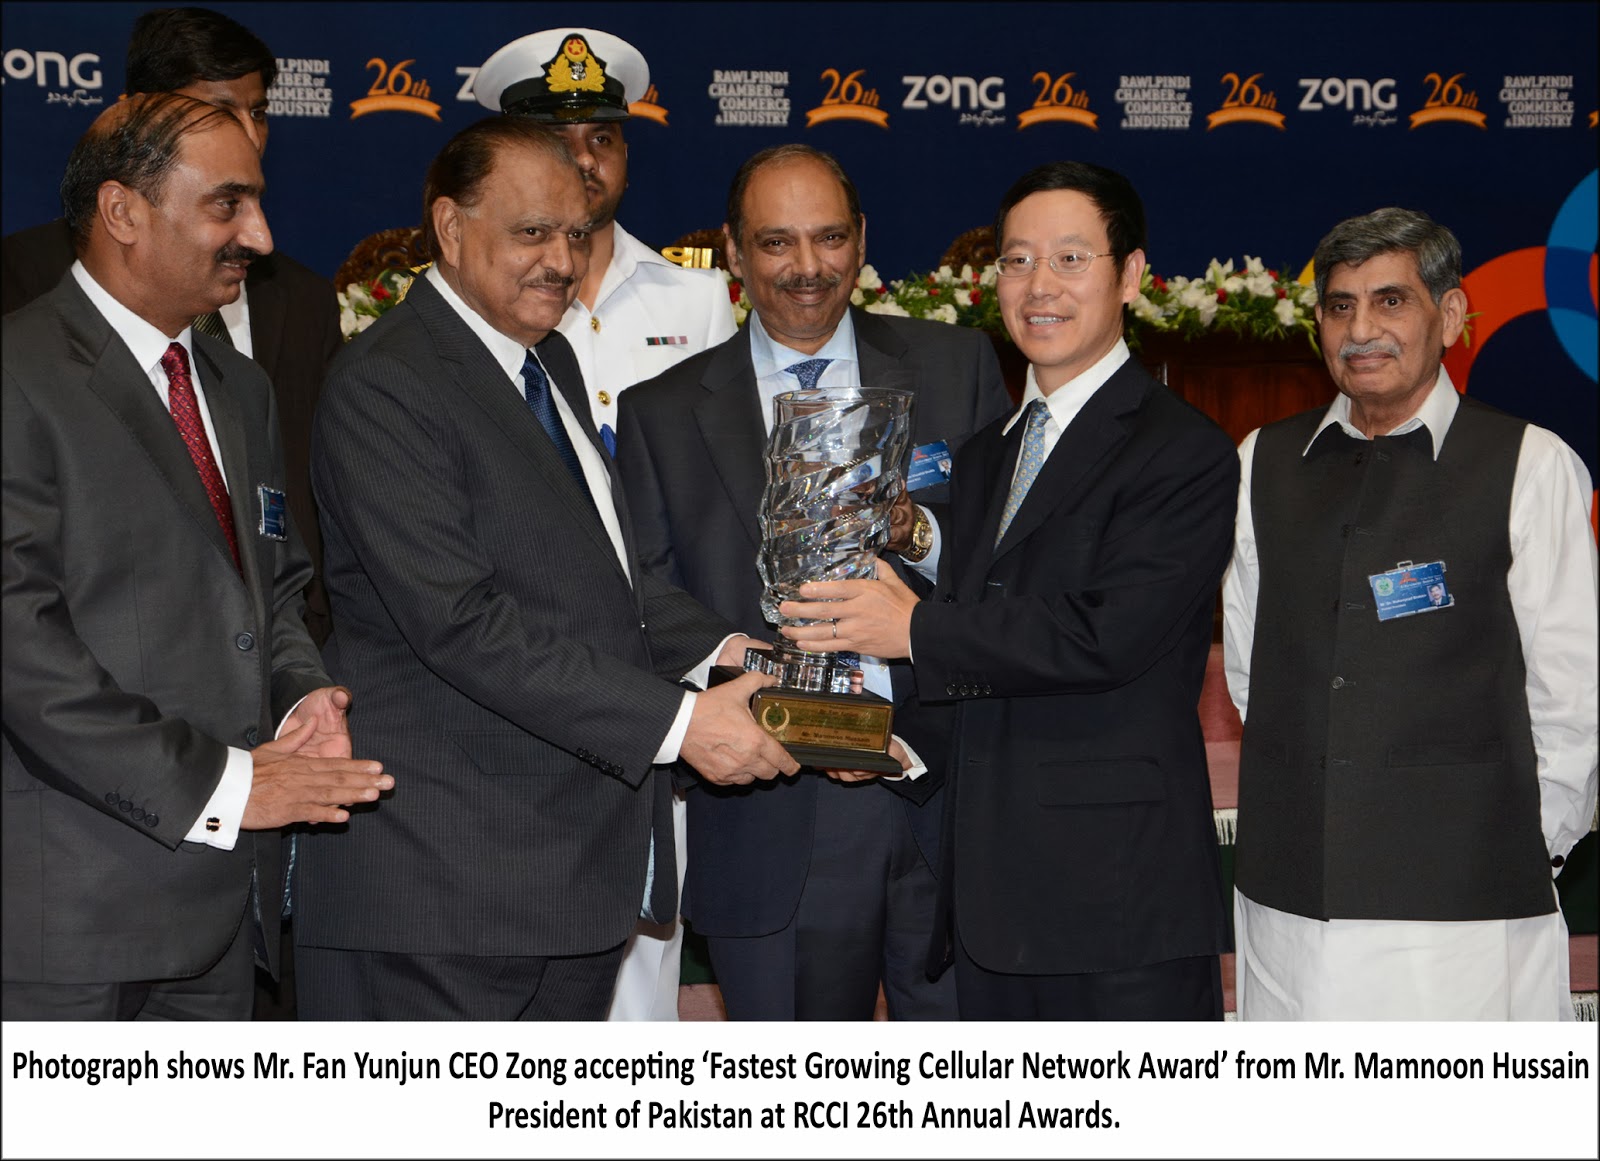 Zong honored with the ‘Fastest Growing Cellular Network’ Award for the year 2013